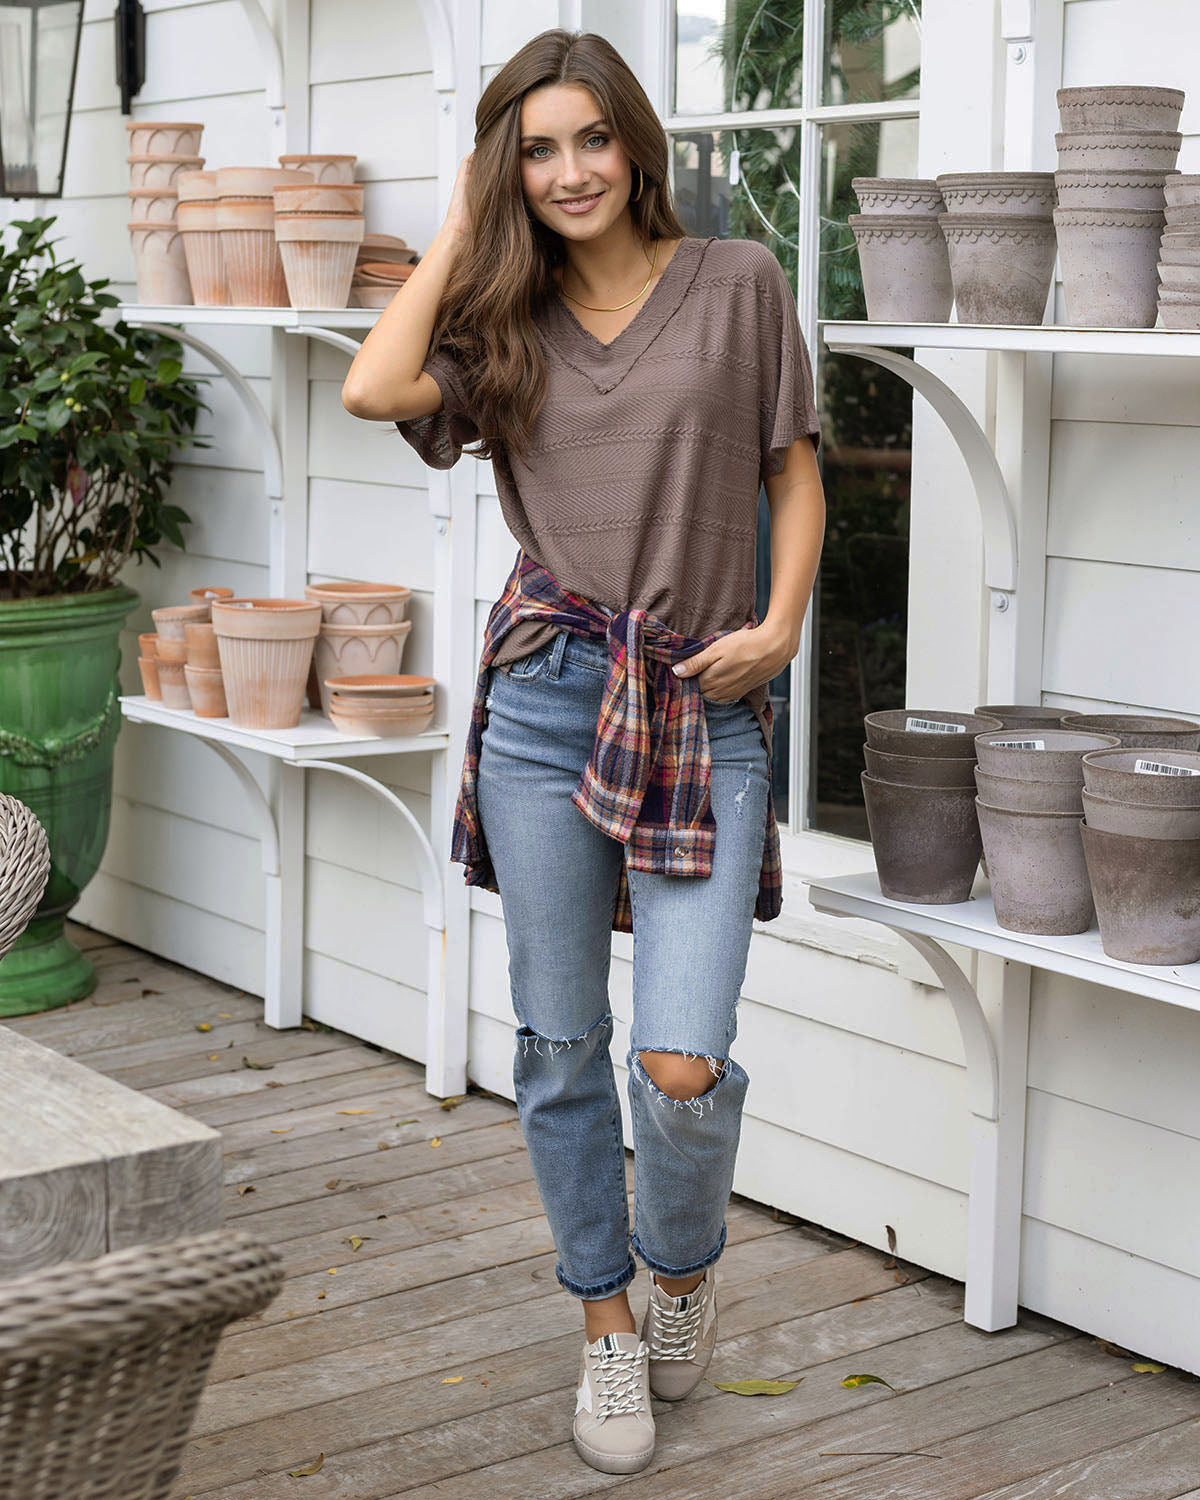 Free Day Textured Dolman Tee in Smoky Portabella - FINAL SALE